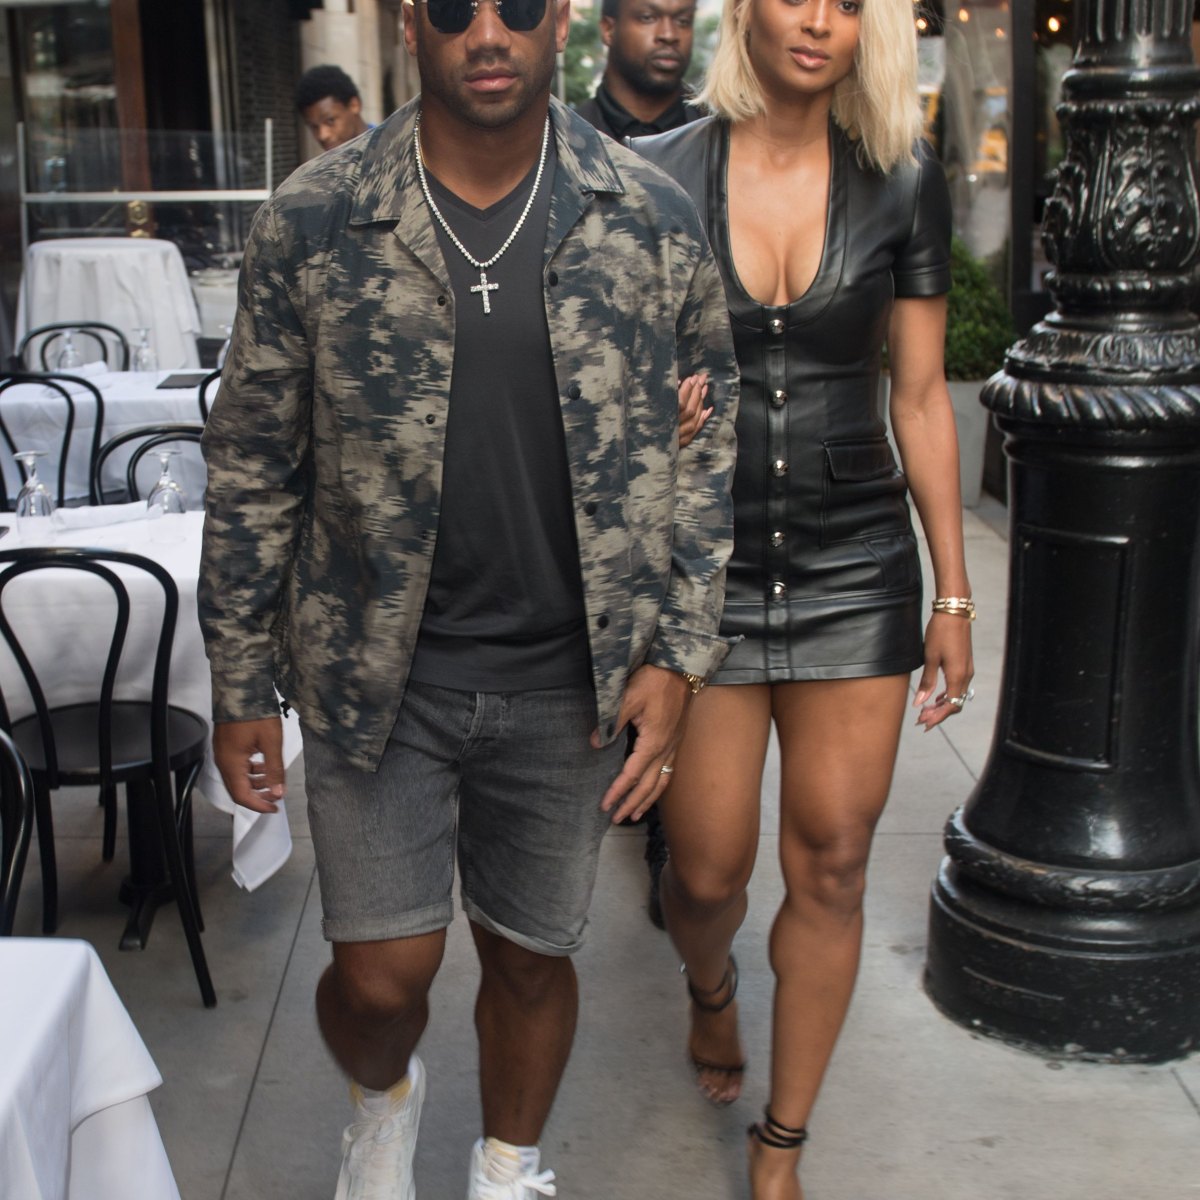 Ciara Shows Off Post-Baby Style in Plunging Leather Dress